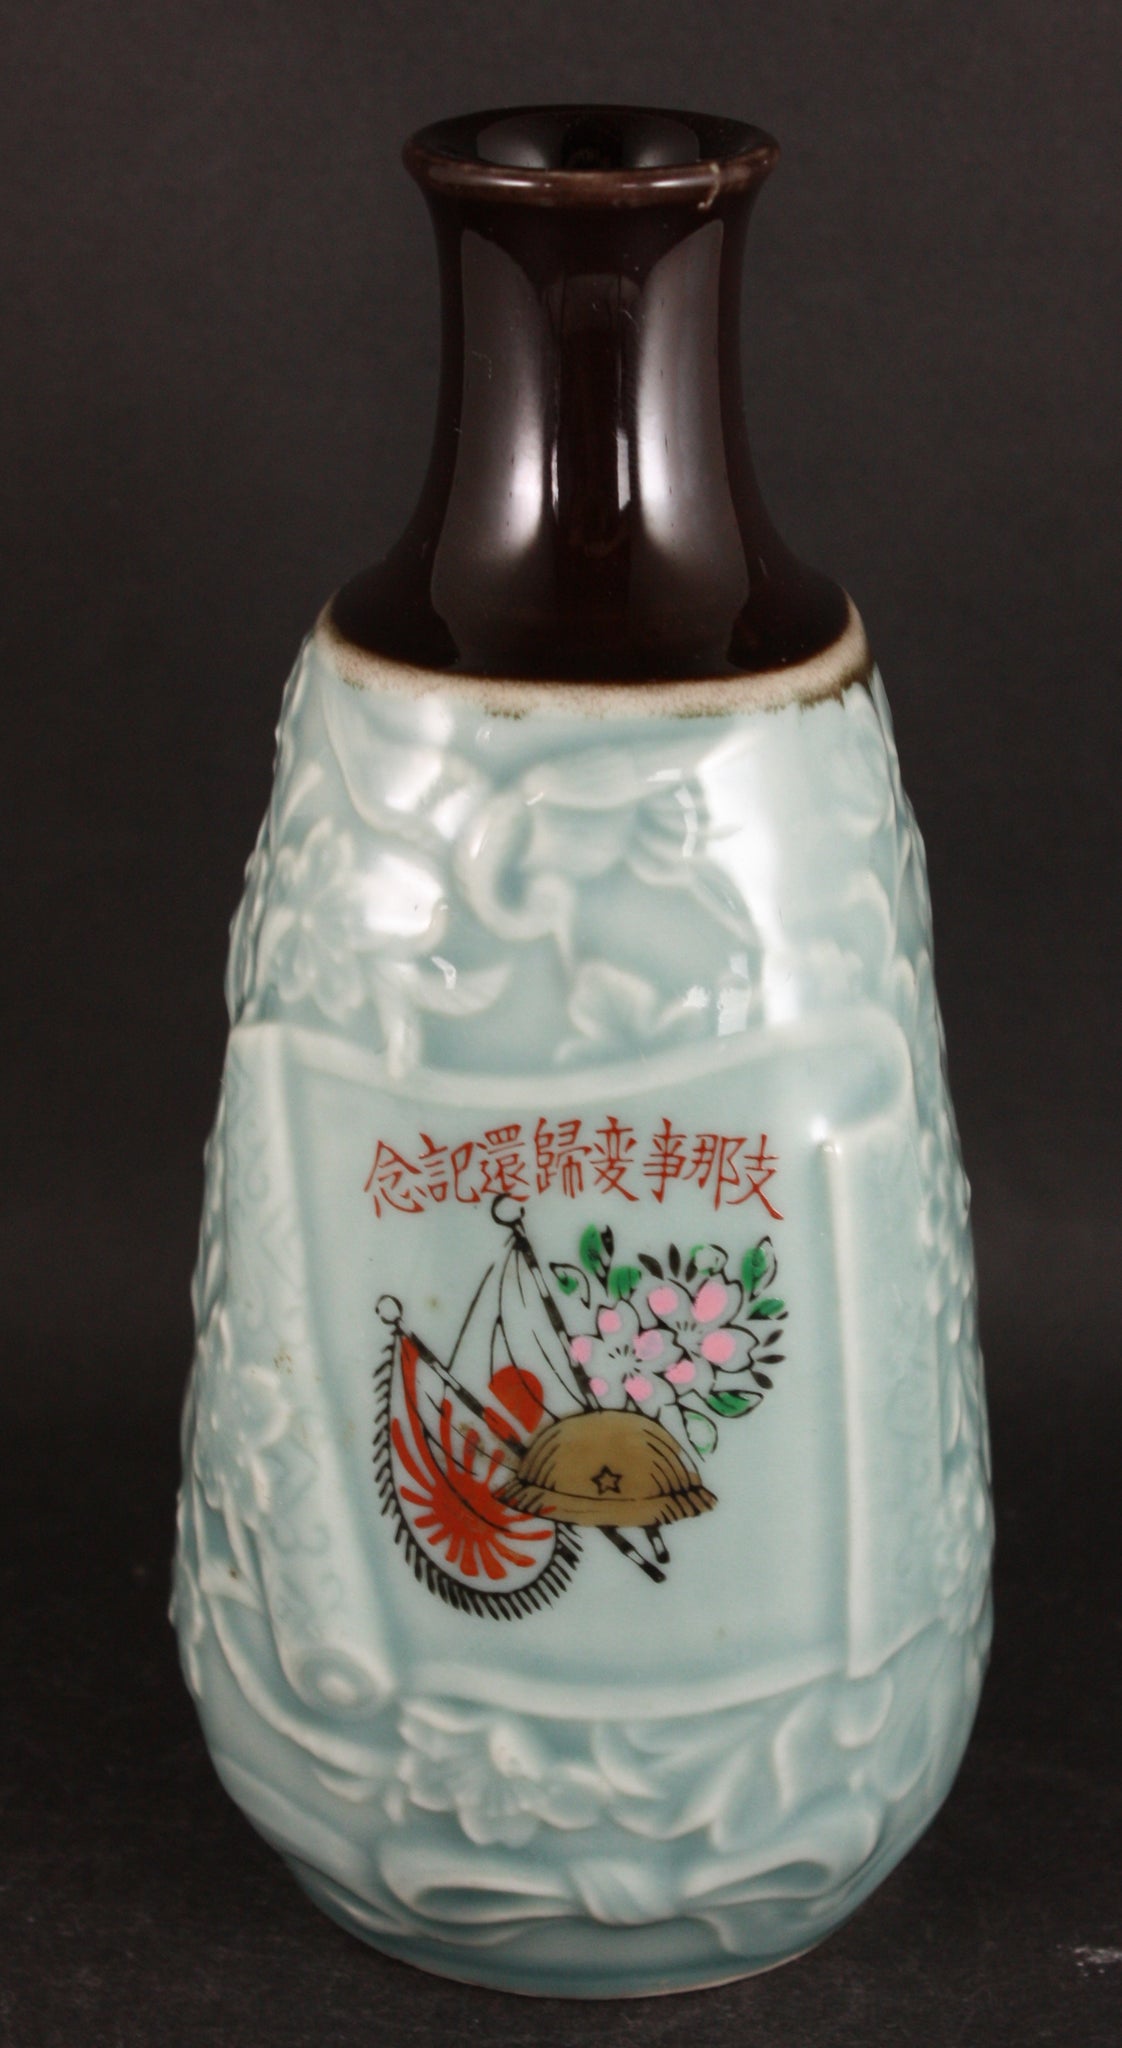 Antique Japanese Military China Incident Helmet Flags Army Sake Bottle